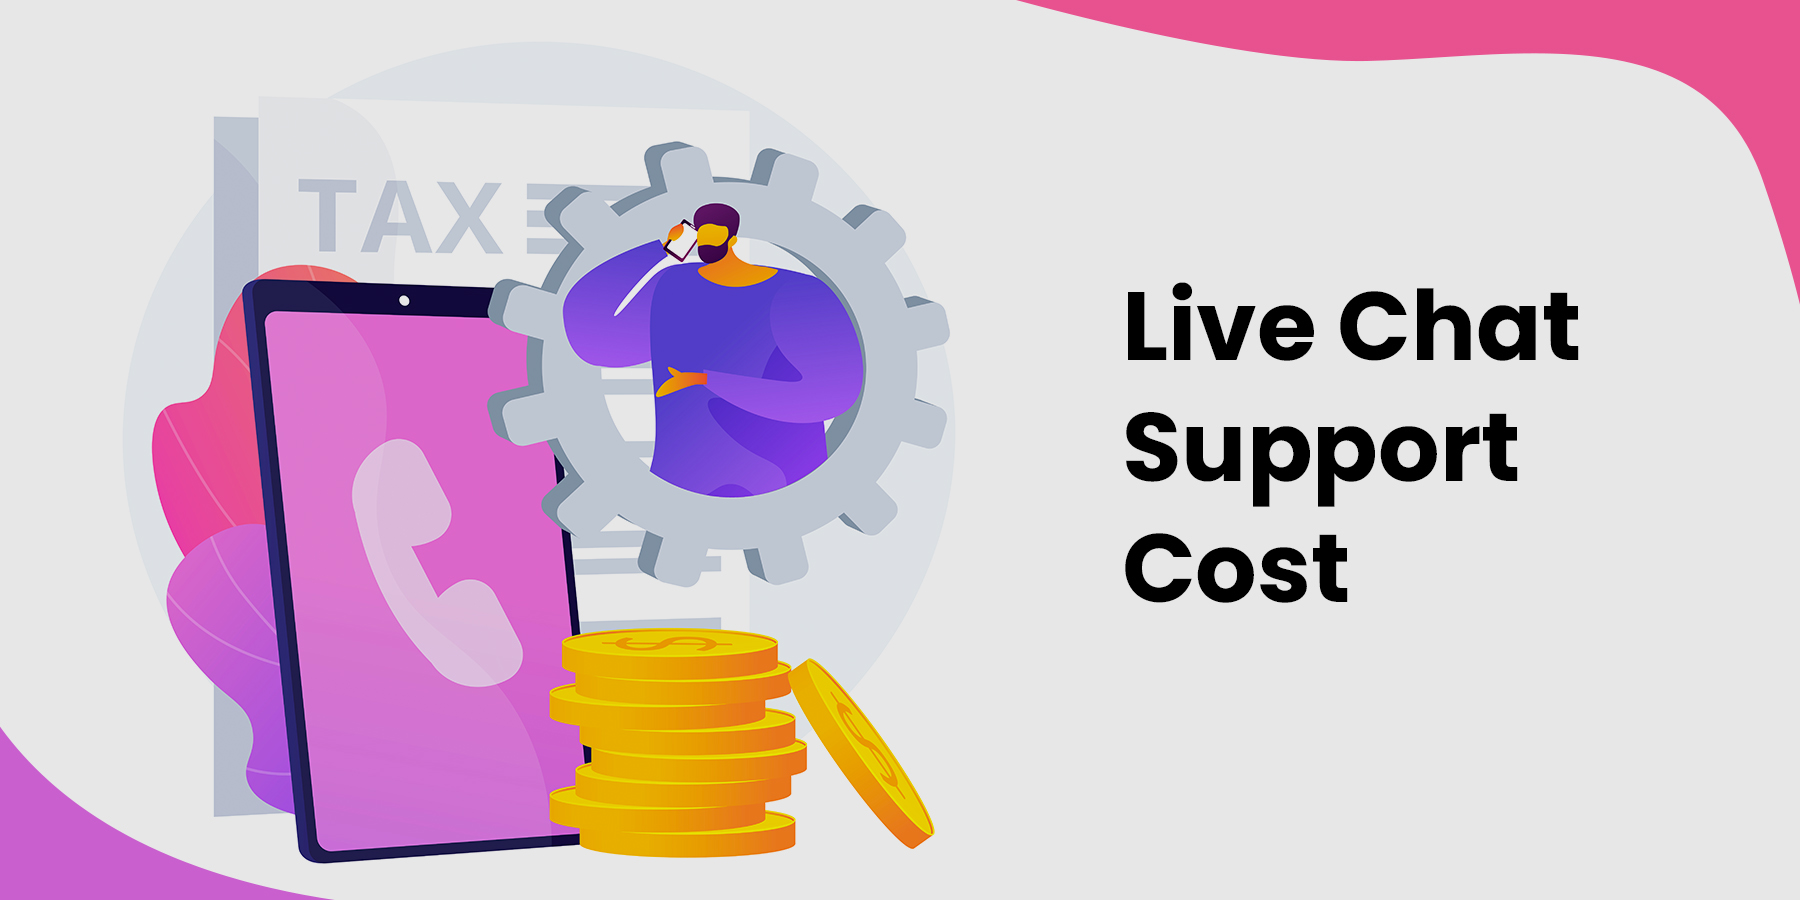 Live Chat Support Cost